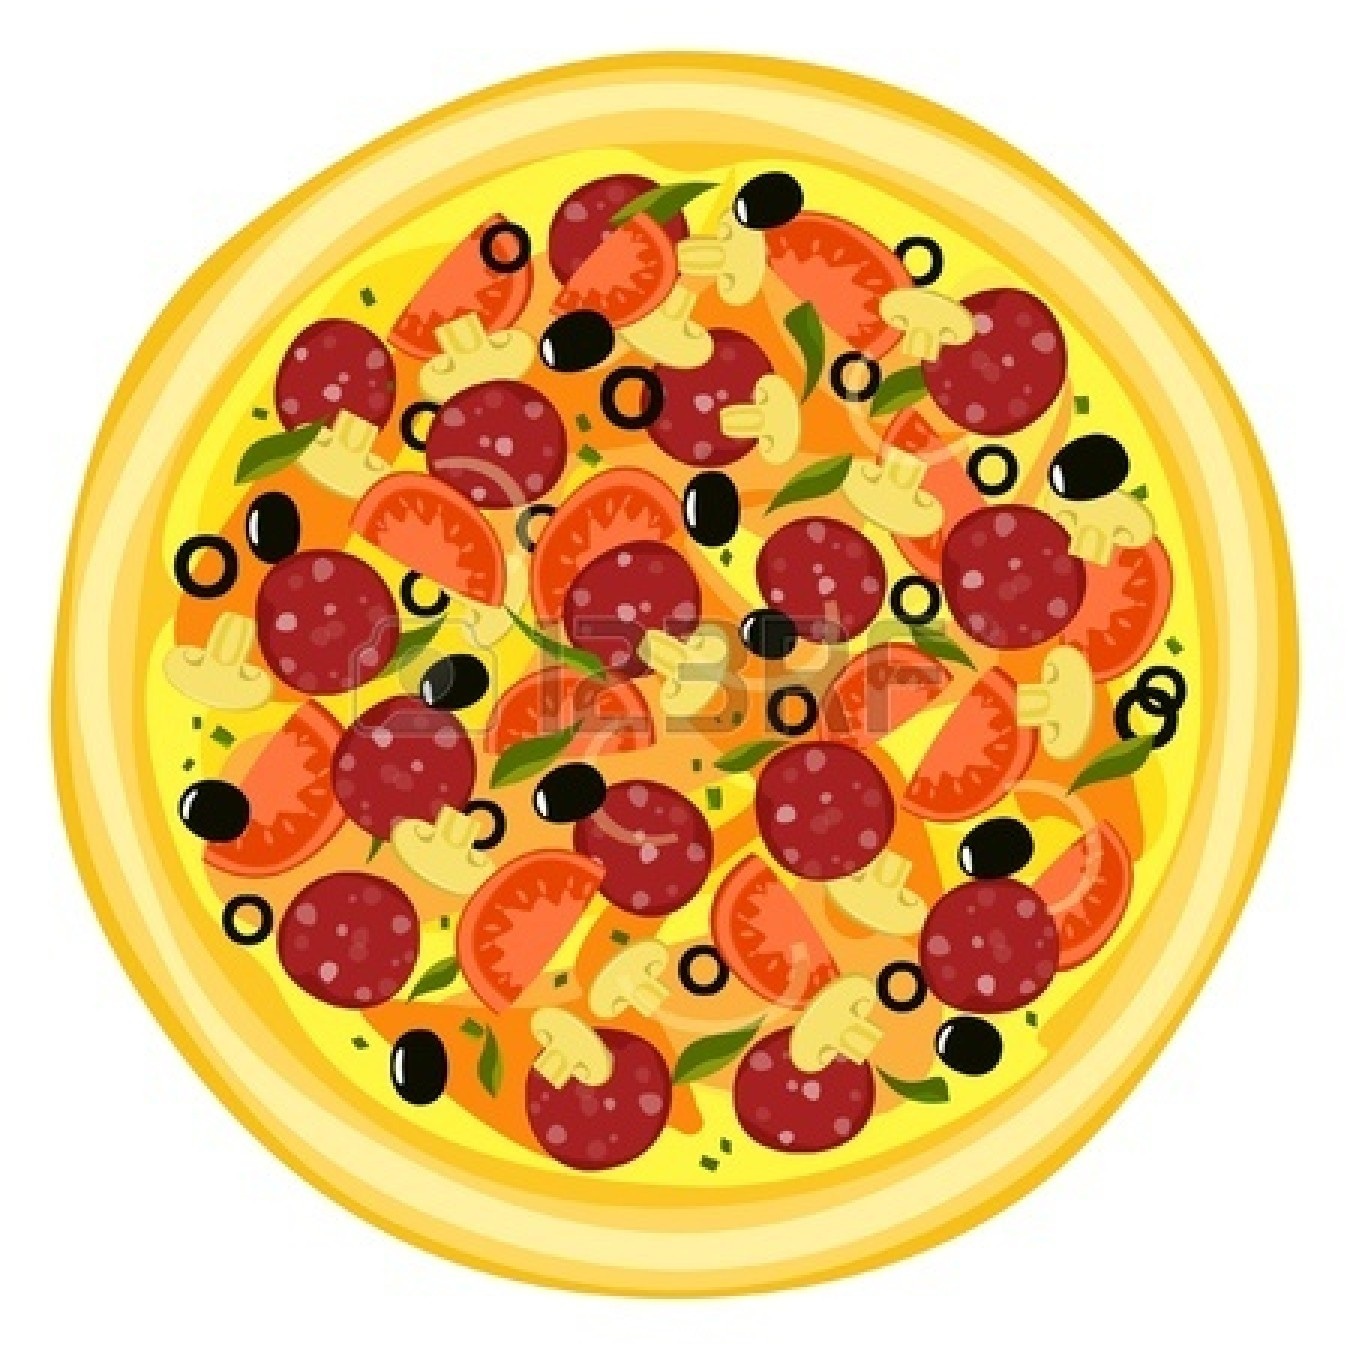 Pizza clip art free download clipart images 3 5